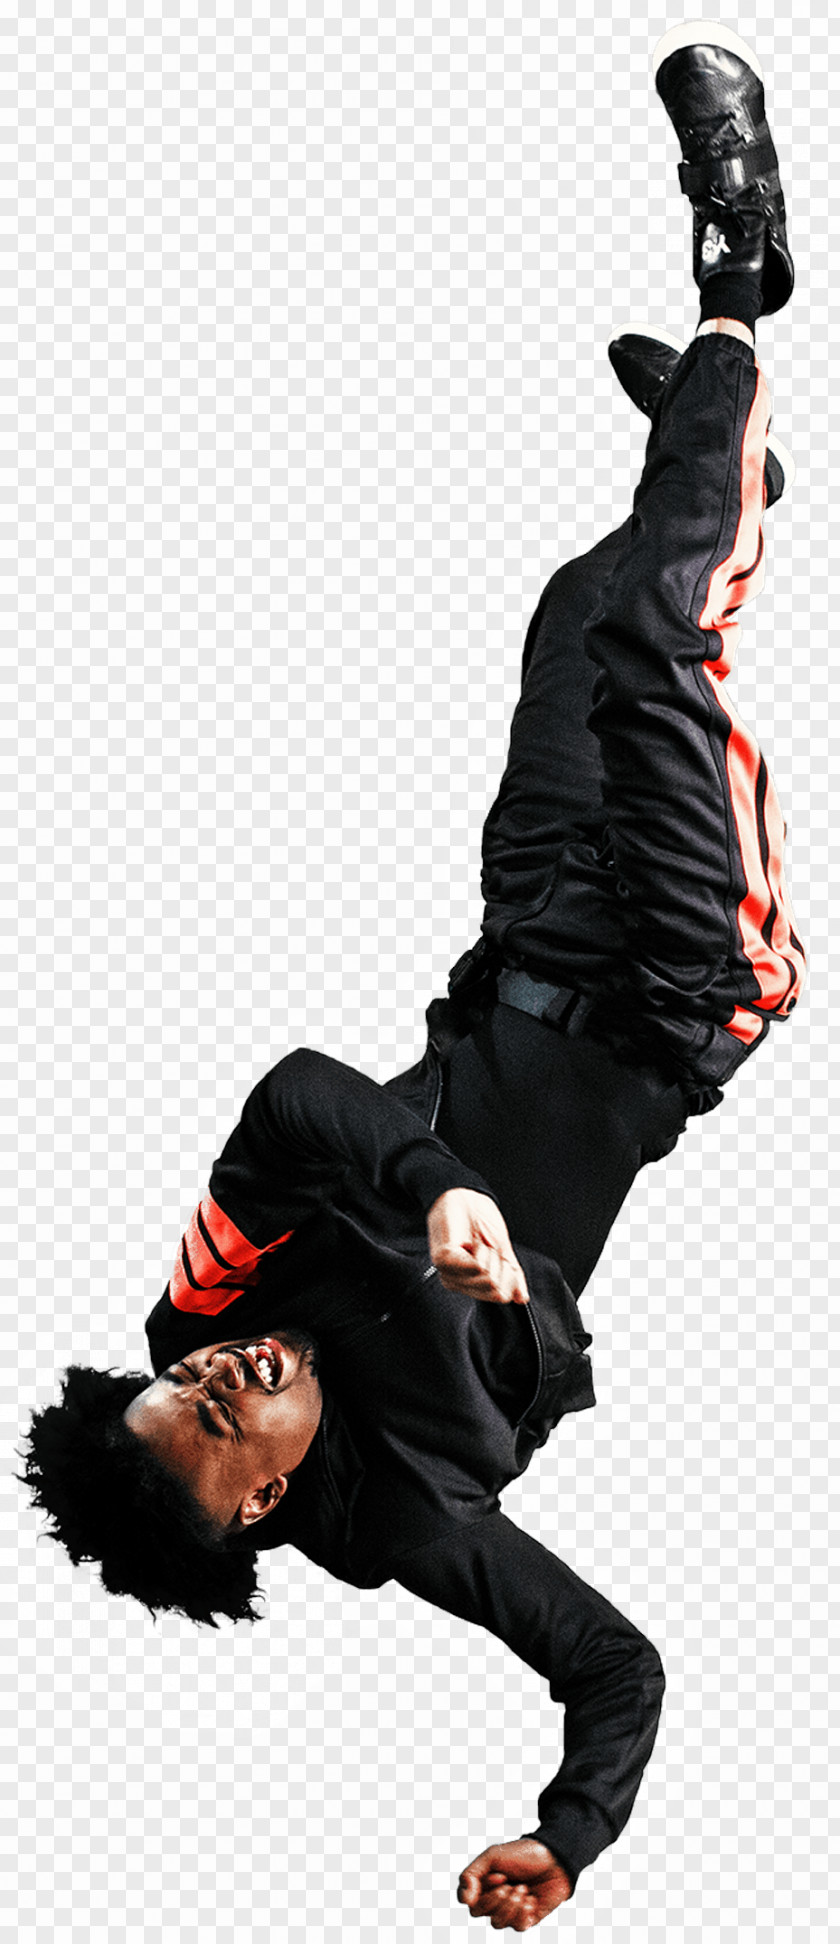 Falling Image Old PNG